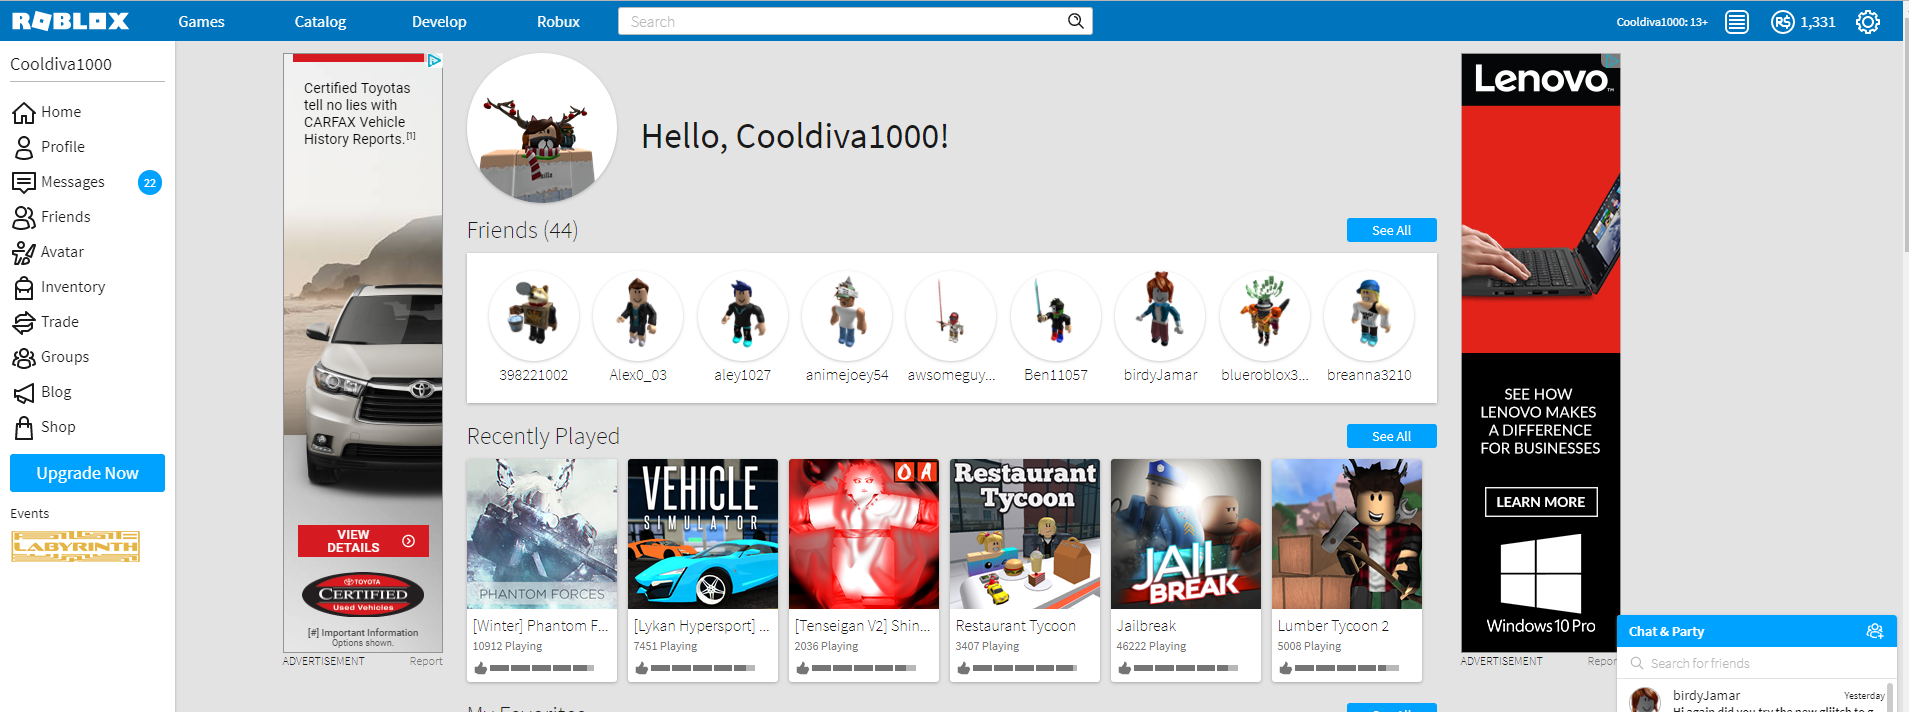 Selling High End 2009 2009 Roblox Female Account Playerup Accounts Marketplace Player 2 Player Secure Platform - 2009 roblox